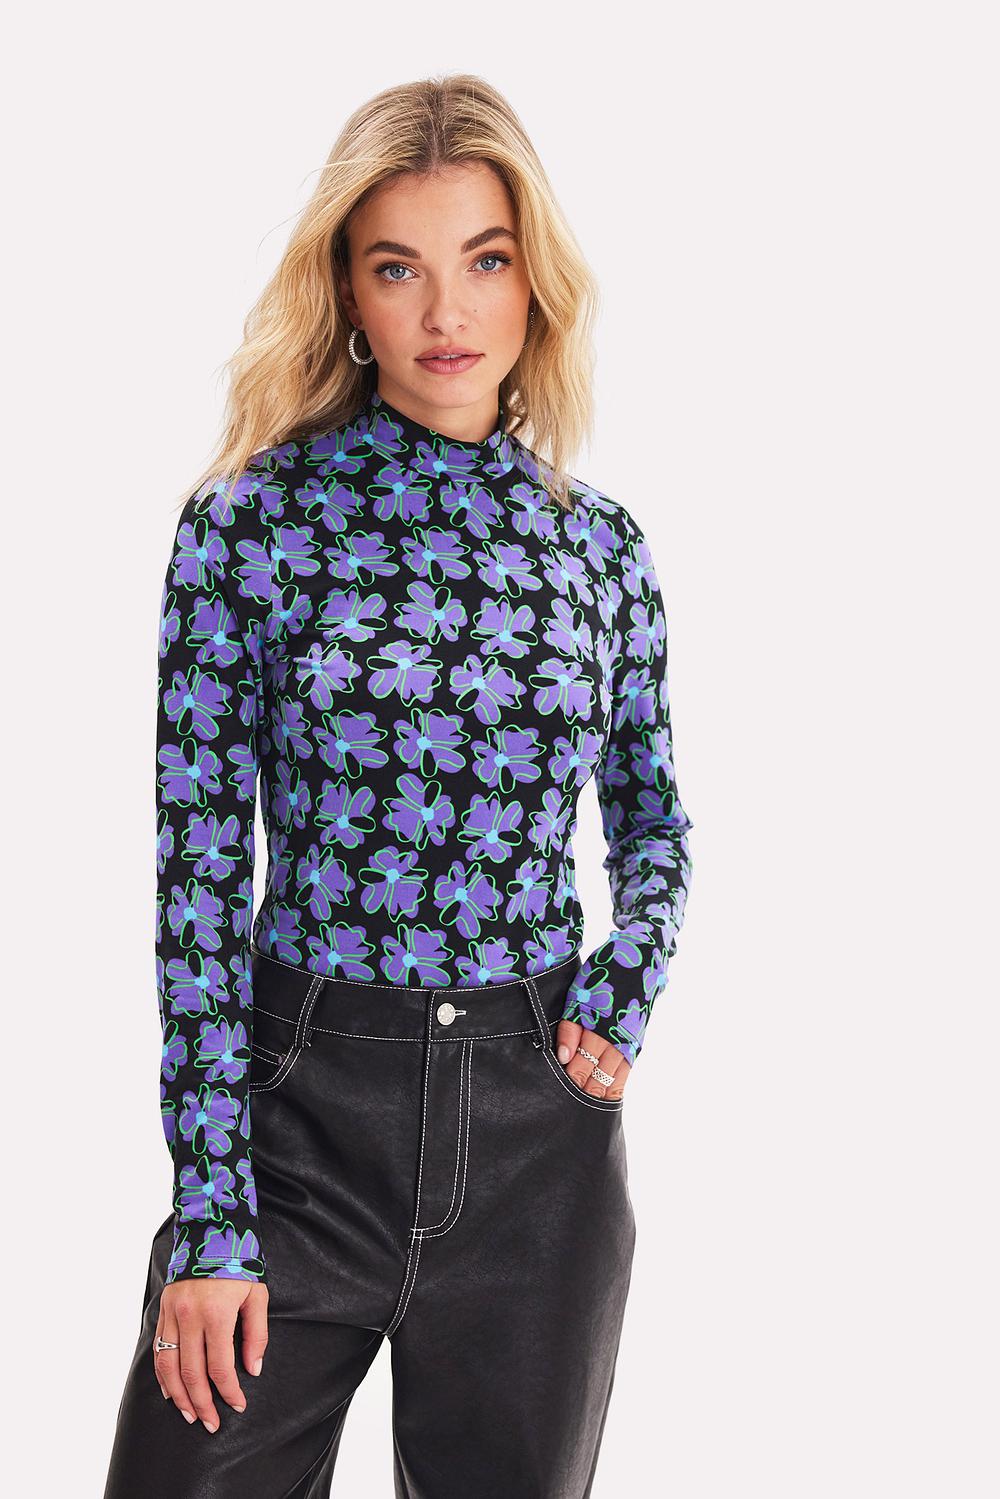 Purple top with floral print